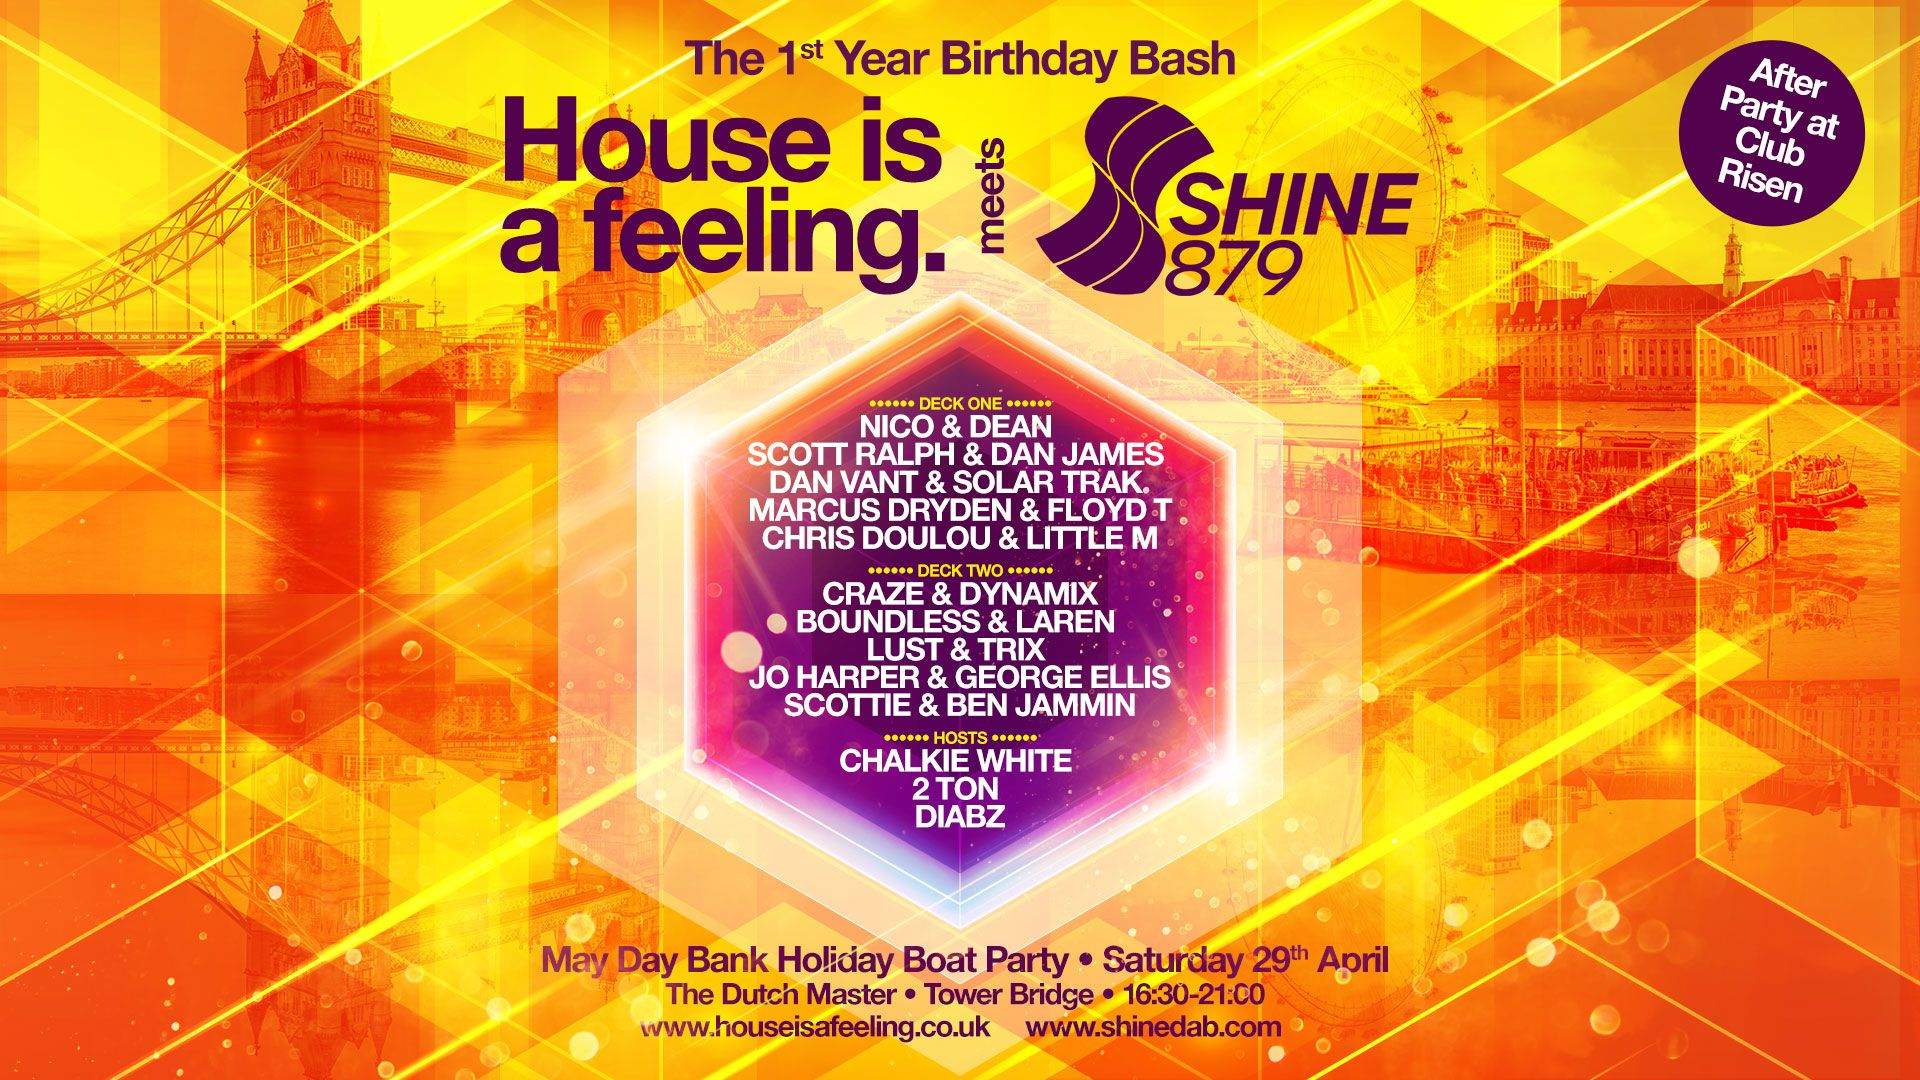 House is a feeling meets shine 879 dab 1st birthday bash boat party & after party - フライヤー表